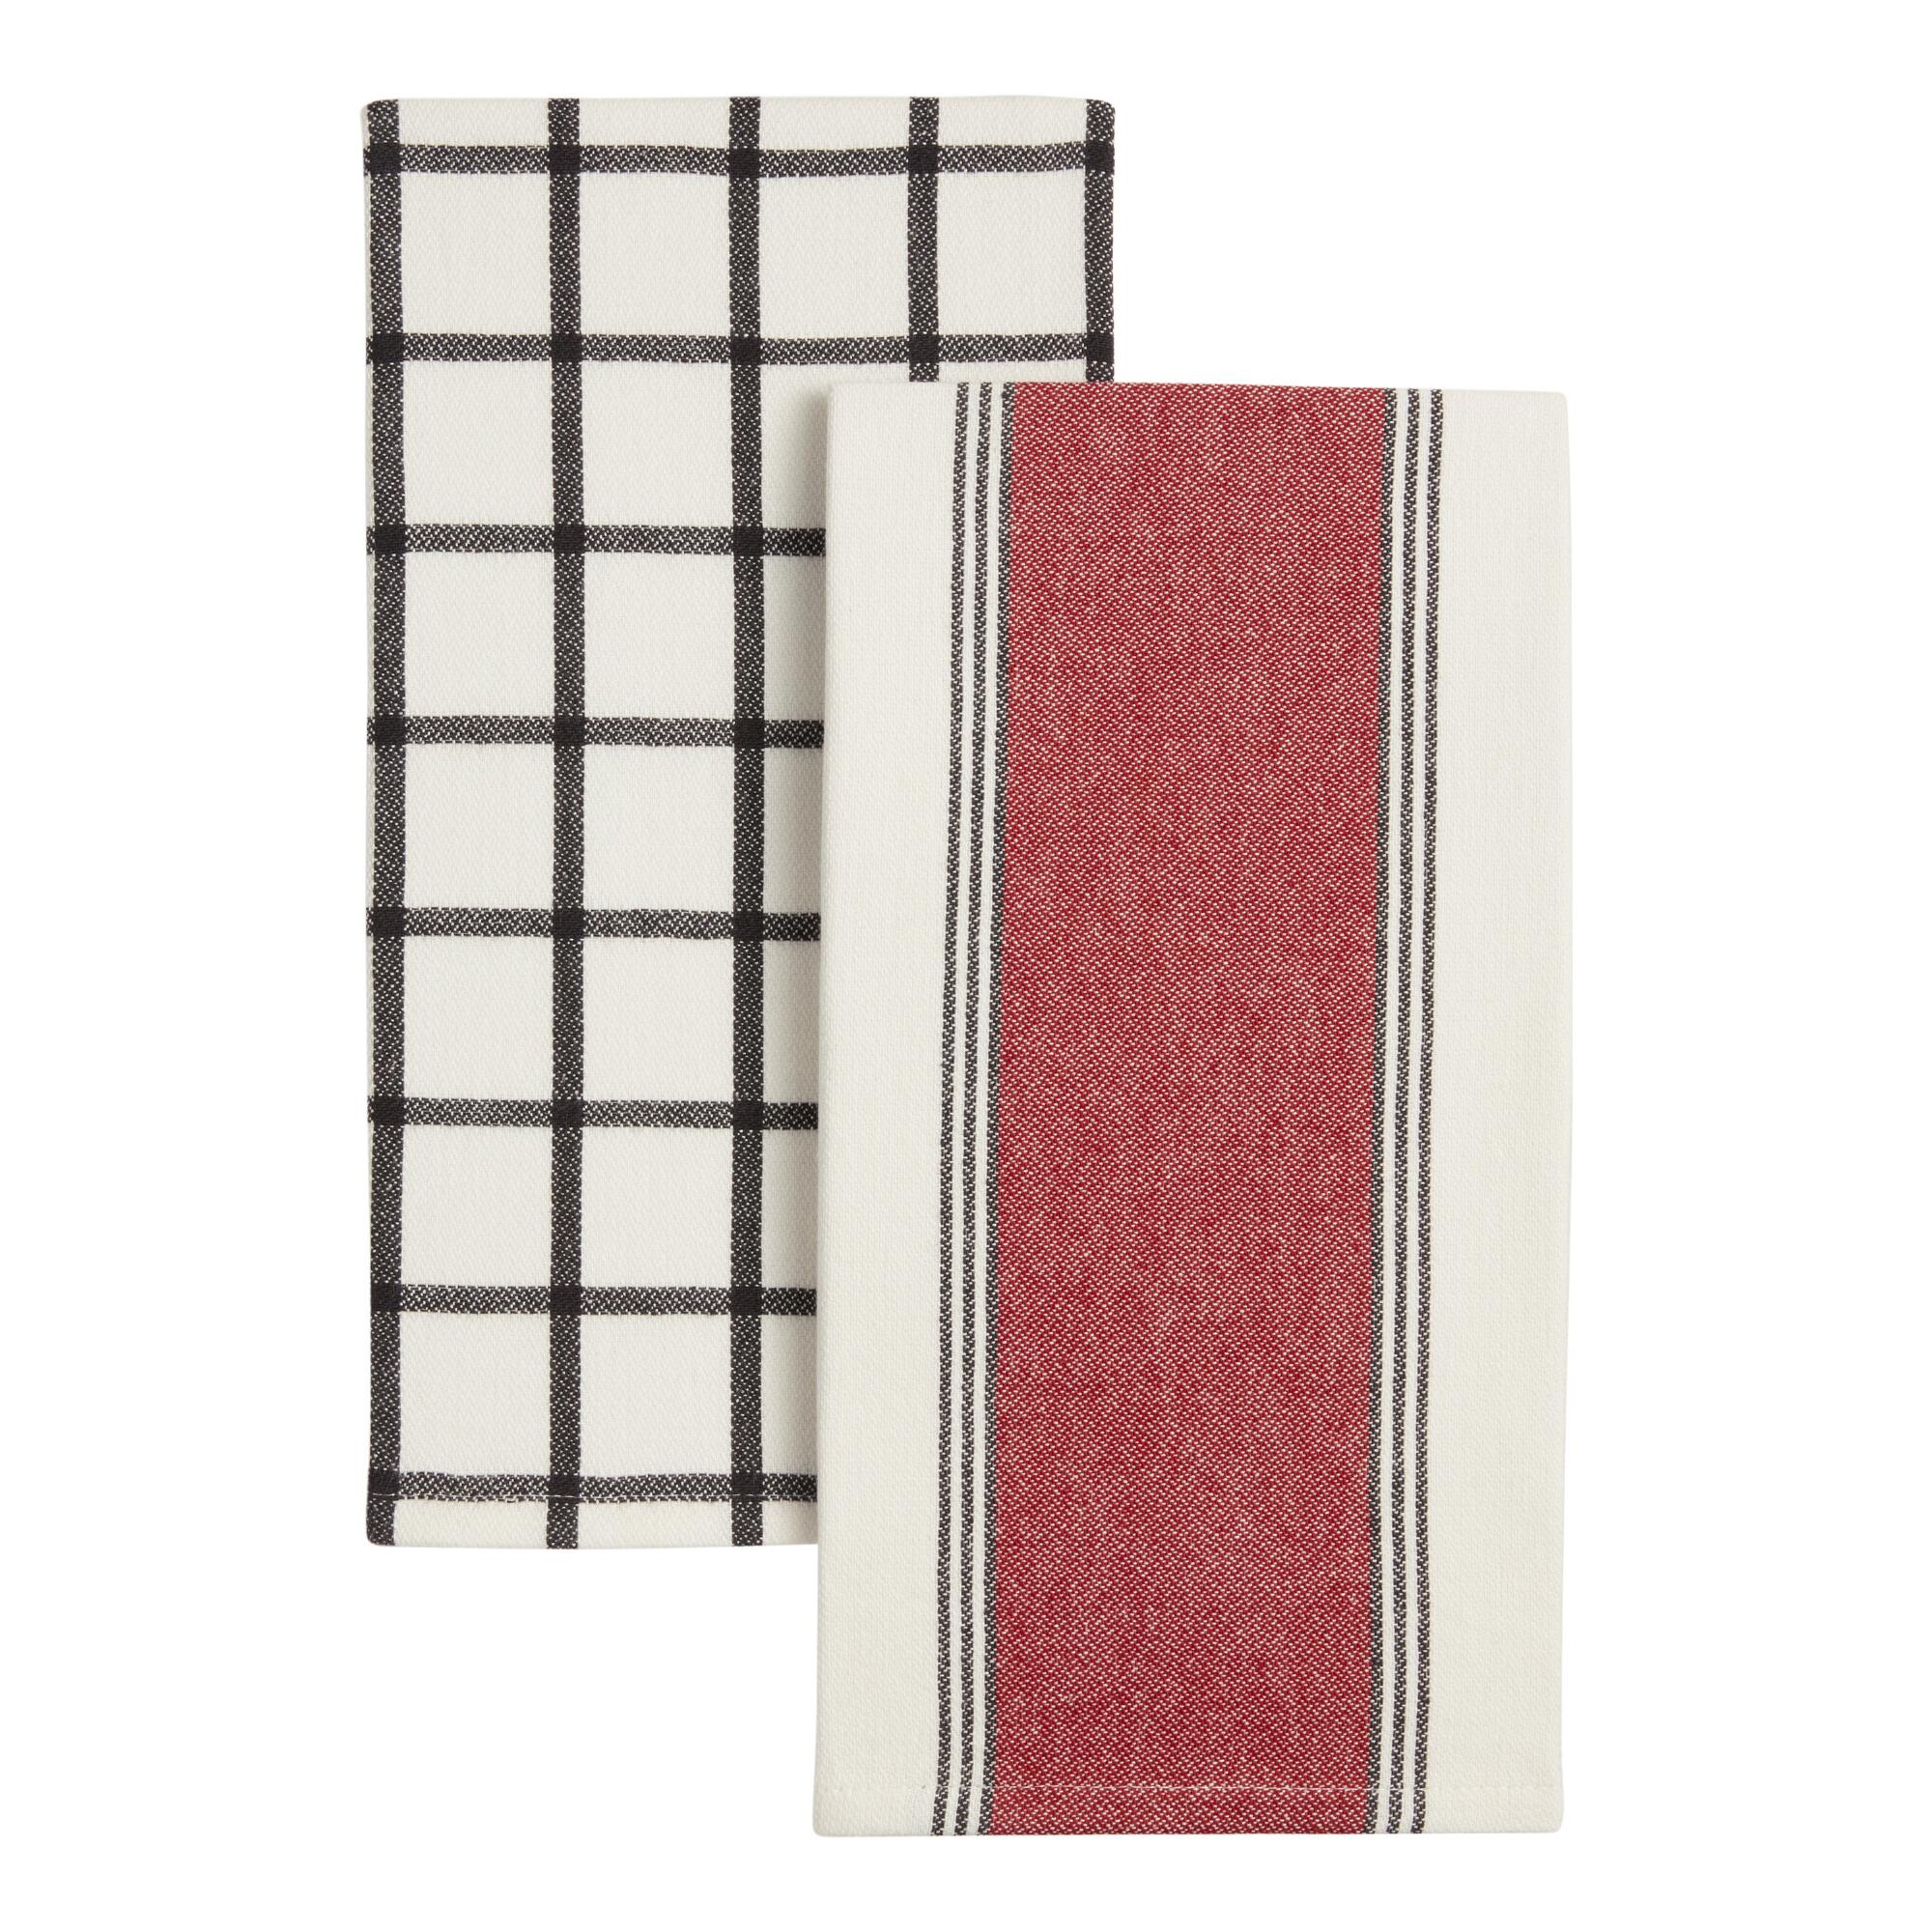 Black, White and Red Kitchen Towels 2 Pack - Cotton - Small by World Market